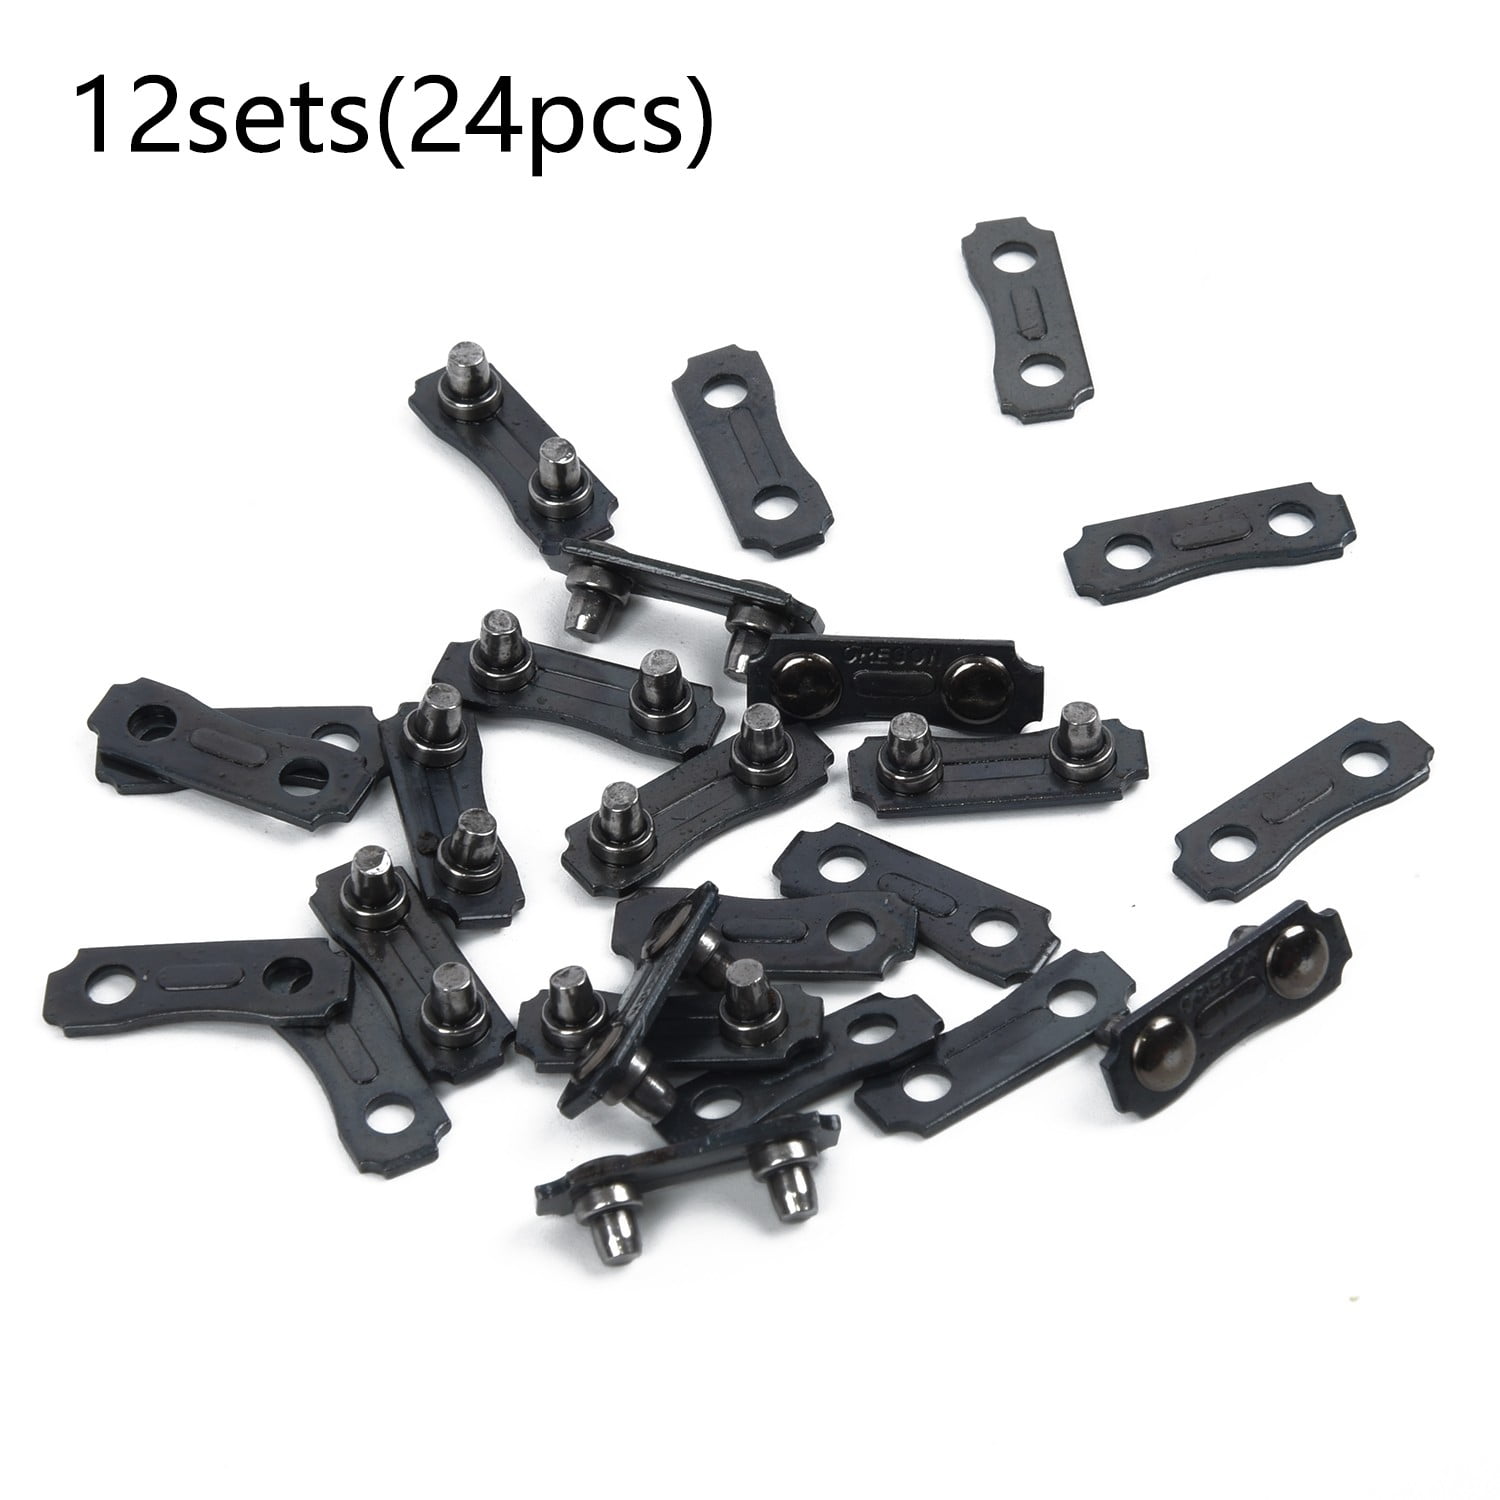 a 5 pack of repair links for chainsaw chain .325 .058 or .050 gauge 